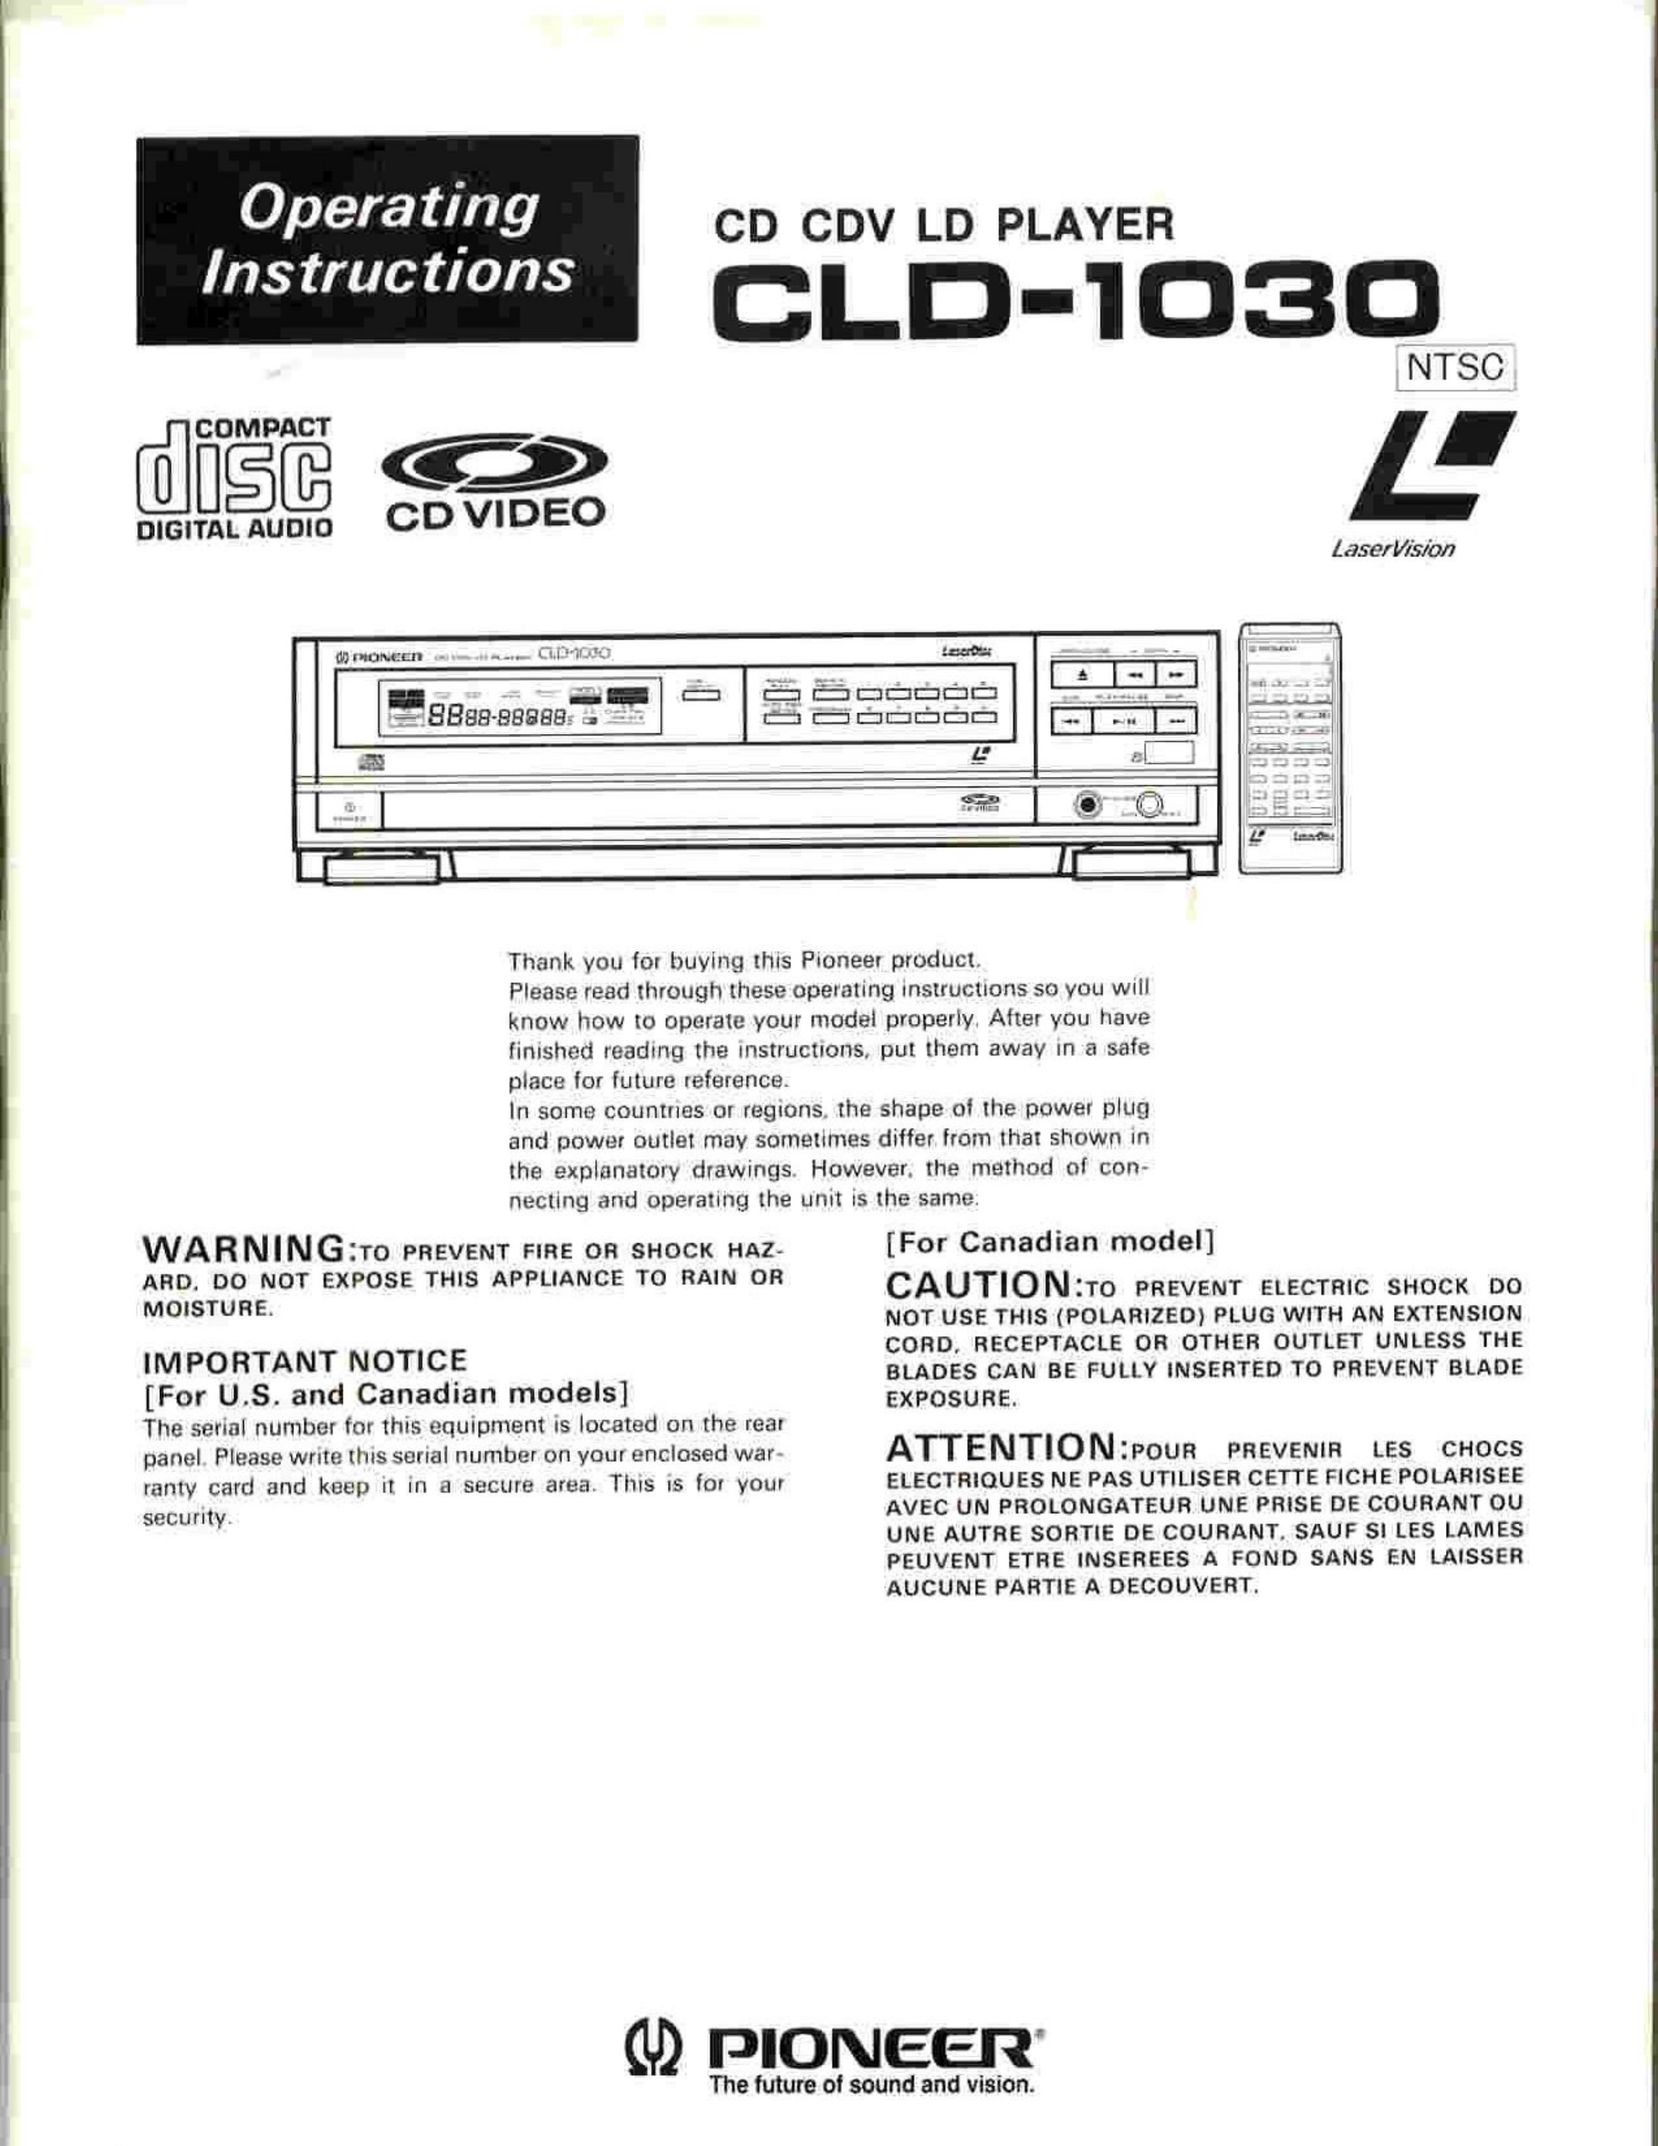 Pioneer CLD-1030 Car Video System User Manual